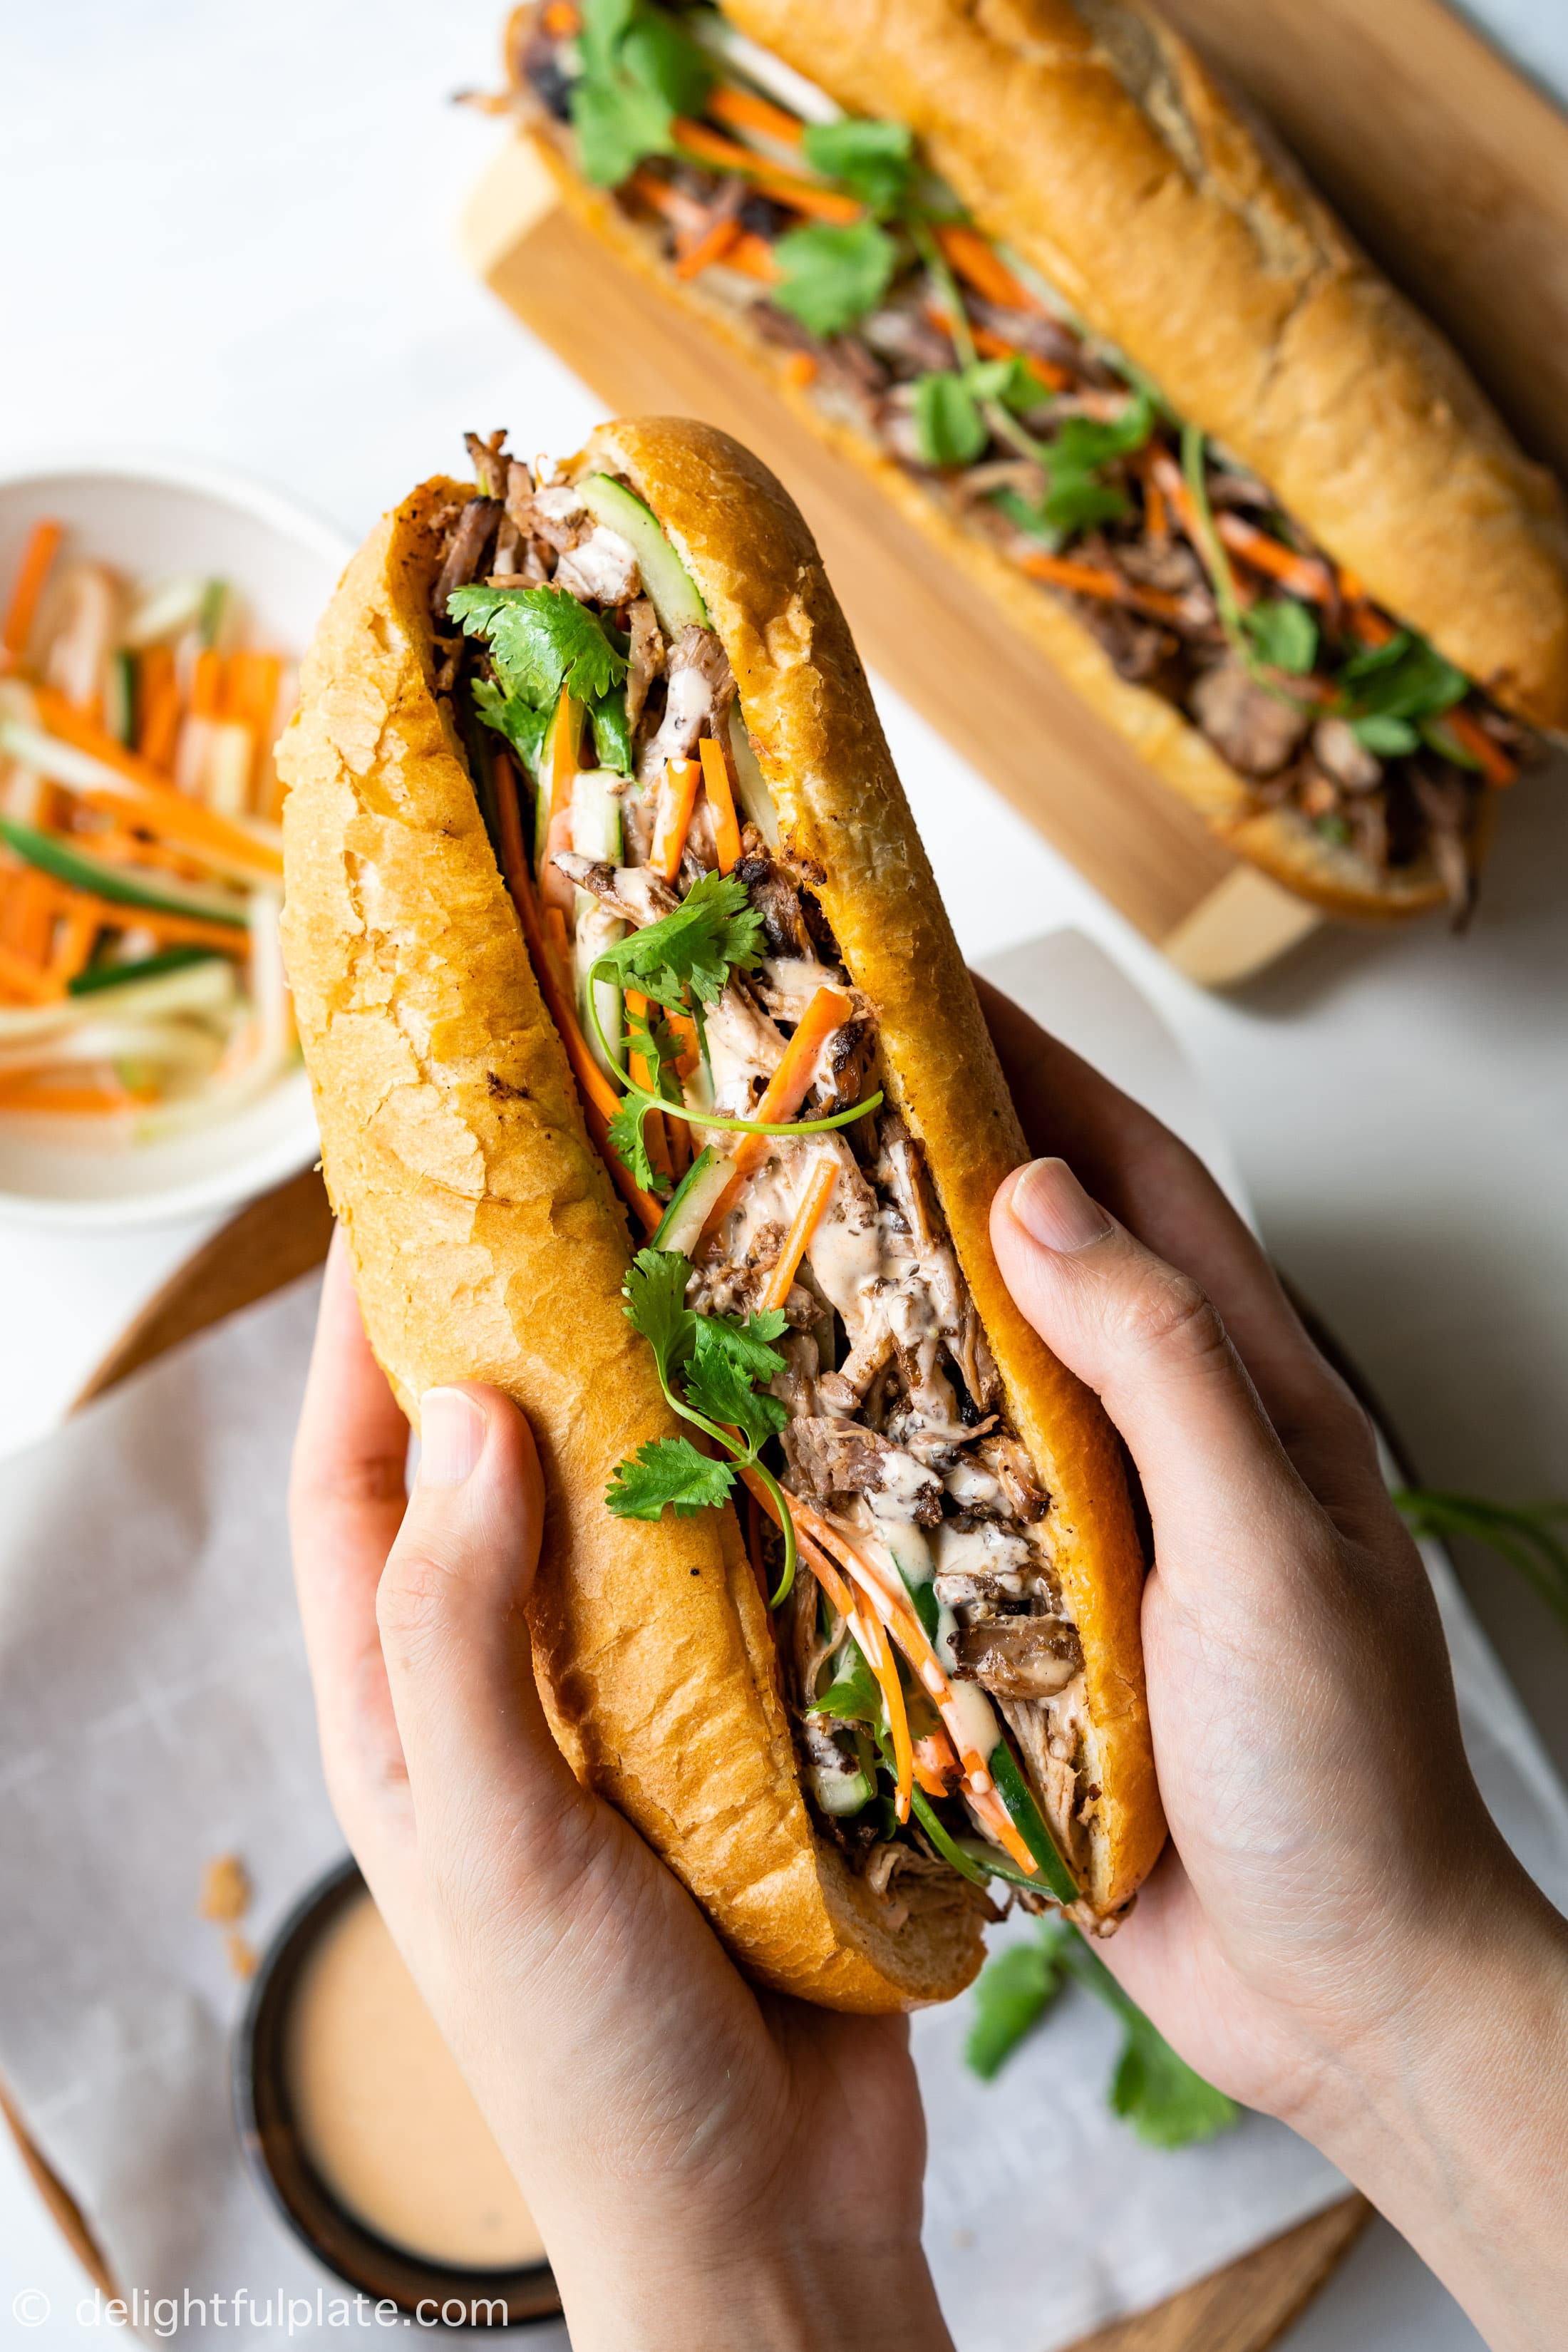 This Vietnamese Pulled Pork Banh Mi features crispy bread, tender and flavorful pork, crunchy pickled vegetables and yummy sriracha mayo sauce. With the help of a slow cooker, this banh mi sandwich recipe is super easy to make. 